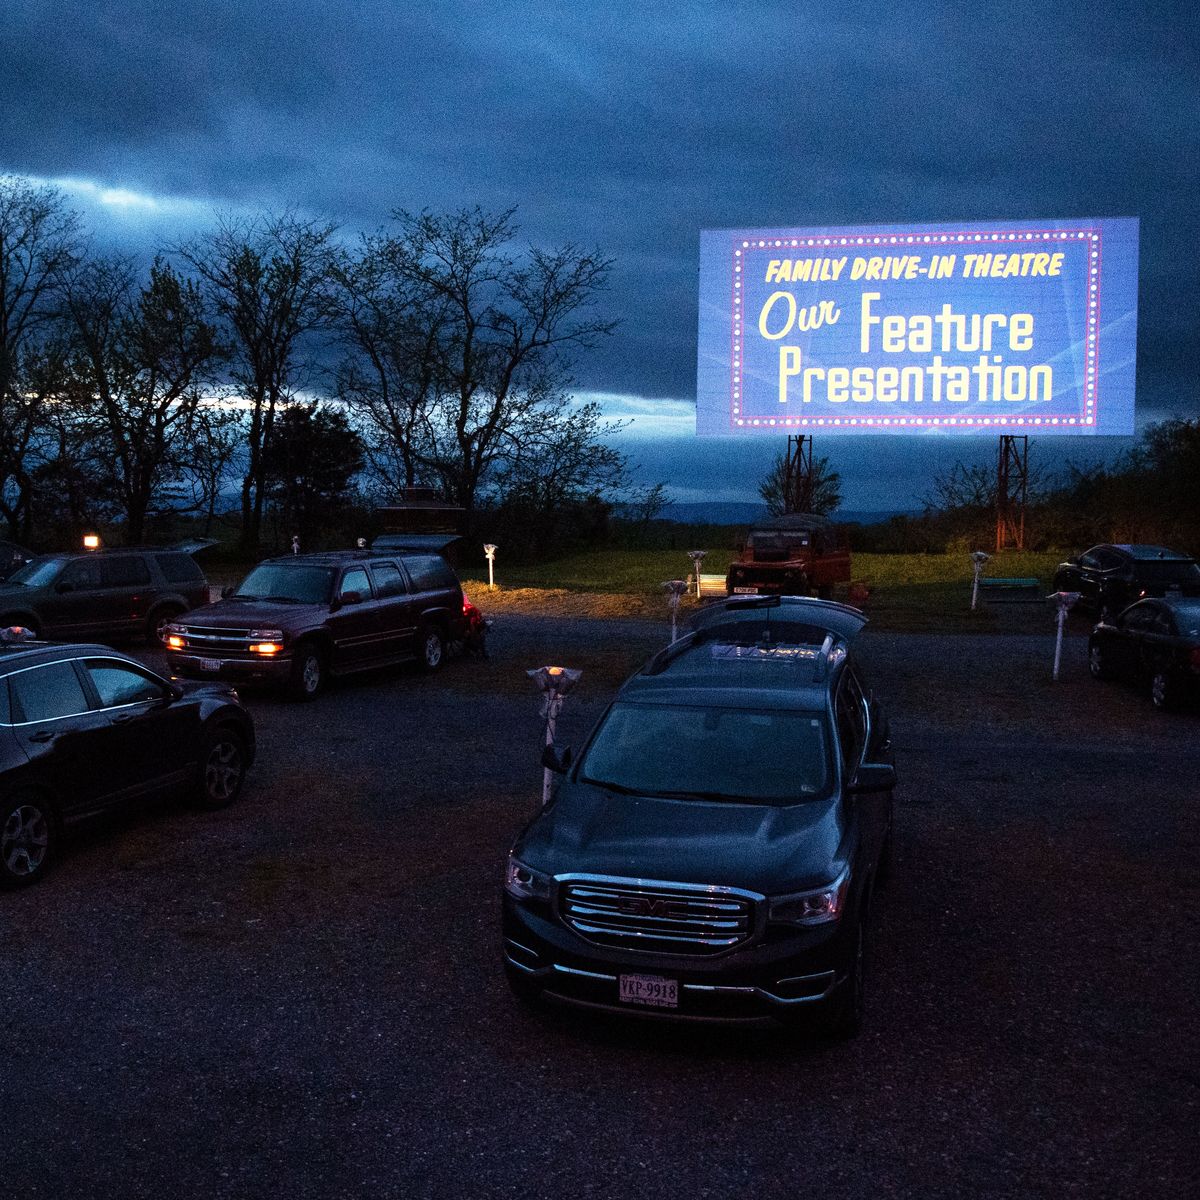 Drive In Movie Theaters Are The New Covid Era Gathering Spot